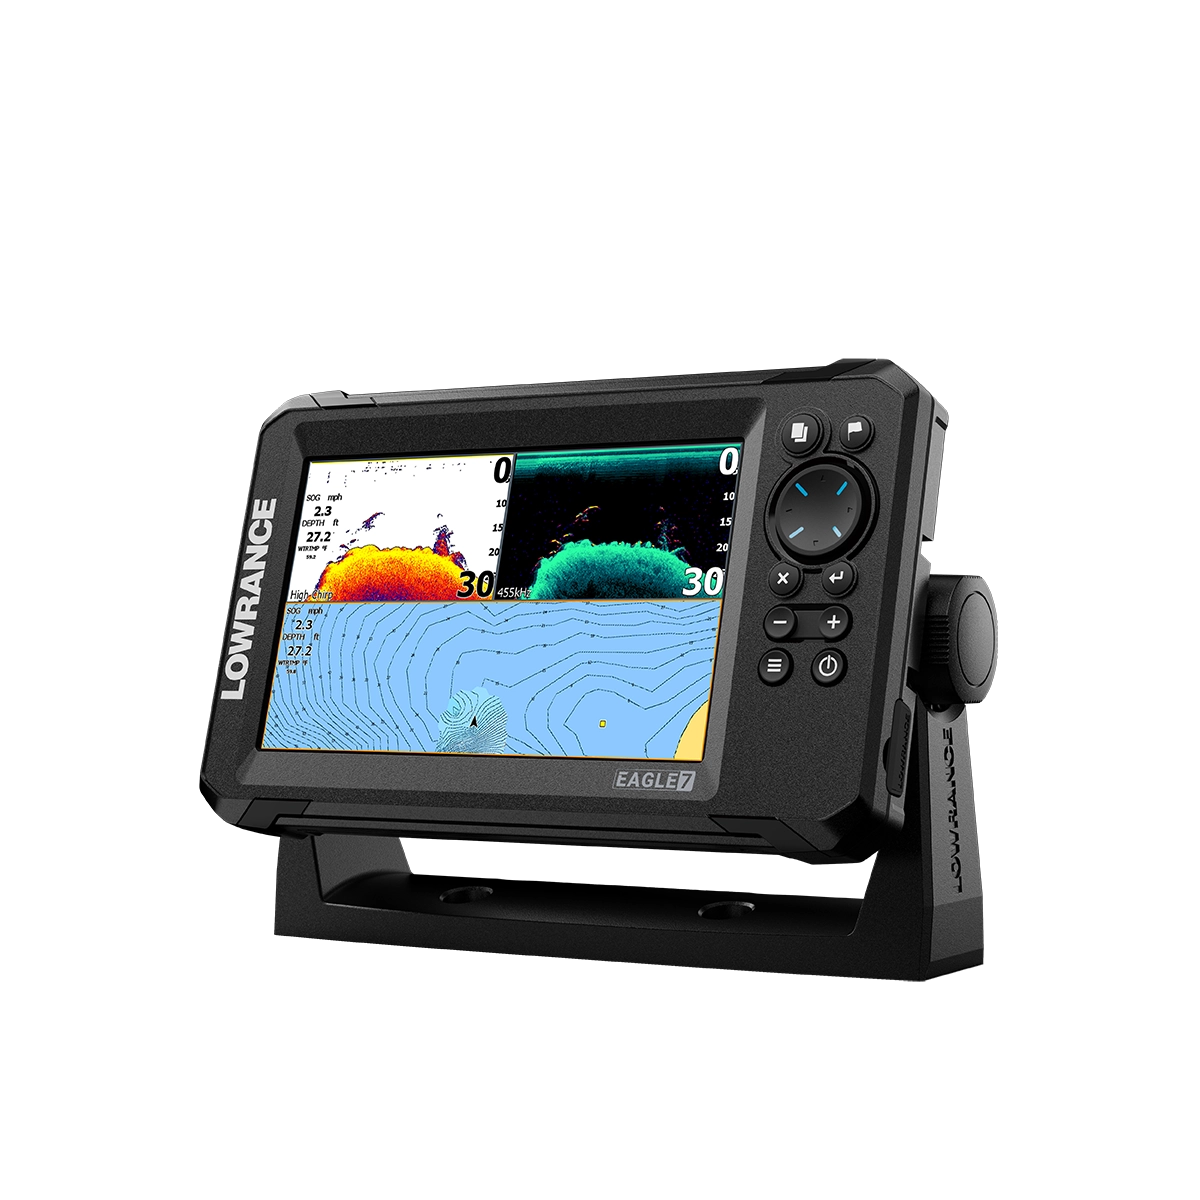 Lowrance EAGLE 7 SplitShot HD with C-MAP (000-16227-001) - GPS Central